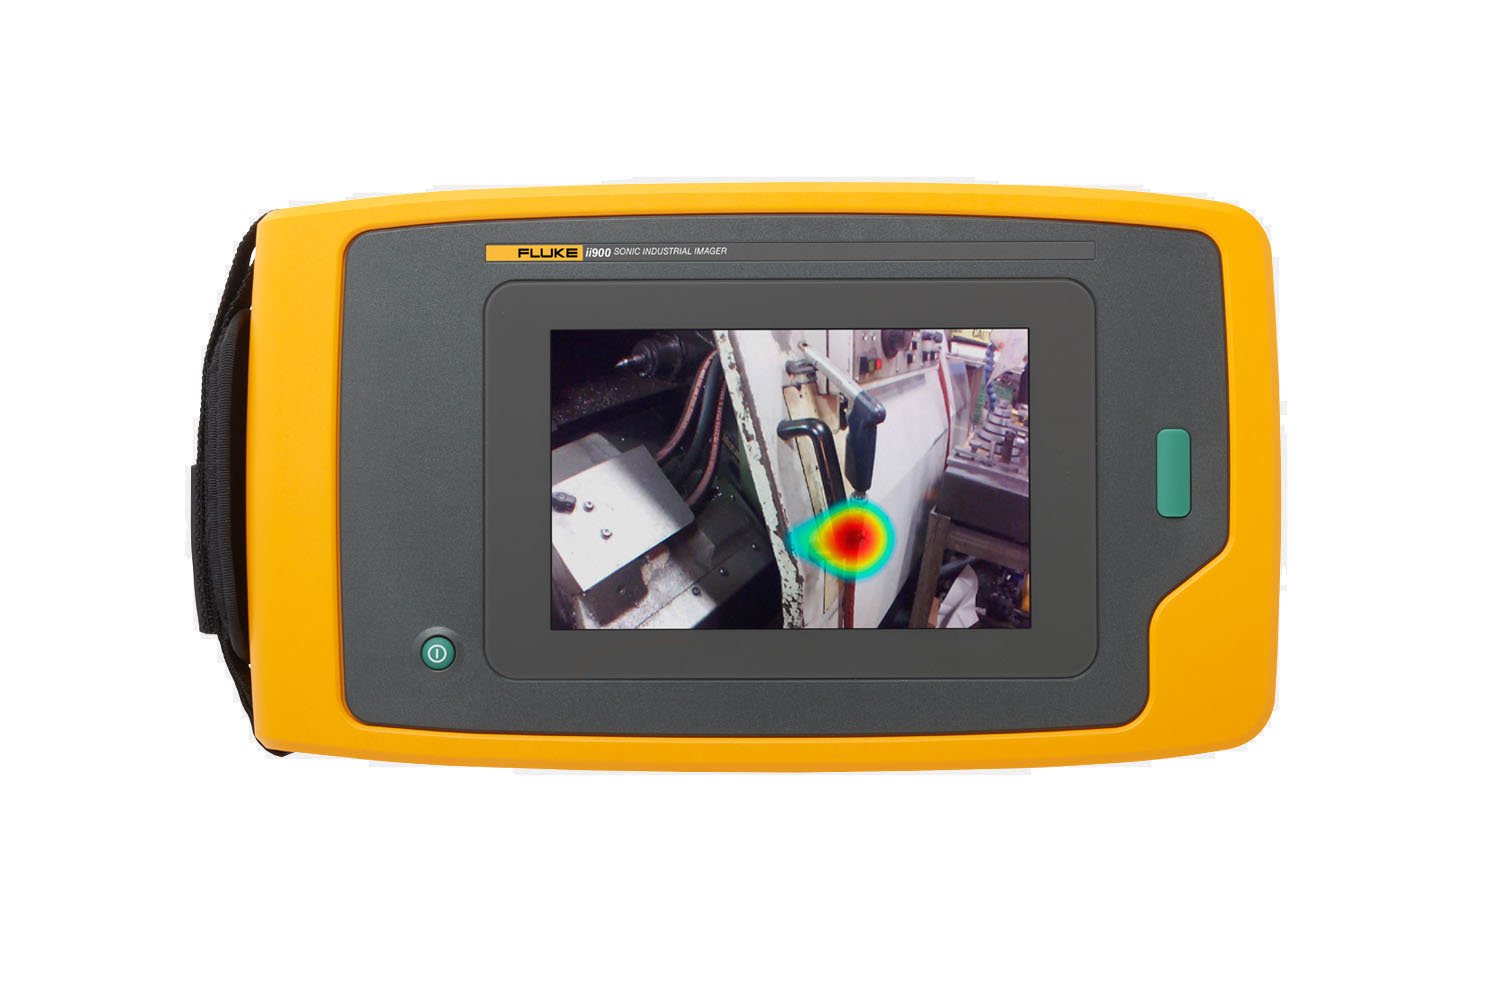 ii900 Industrial Acoustic Imager, High-performance tool for precise industrial inspection